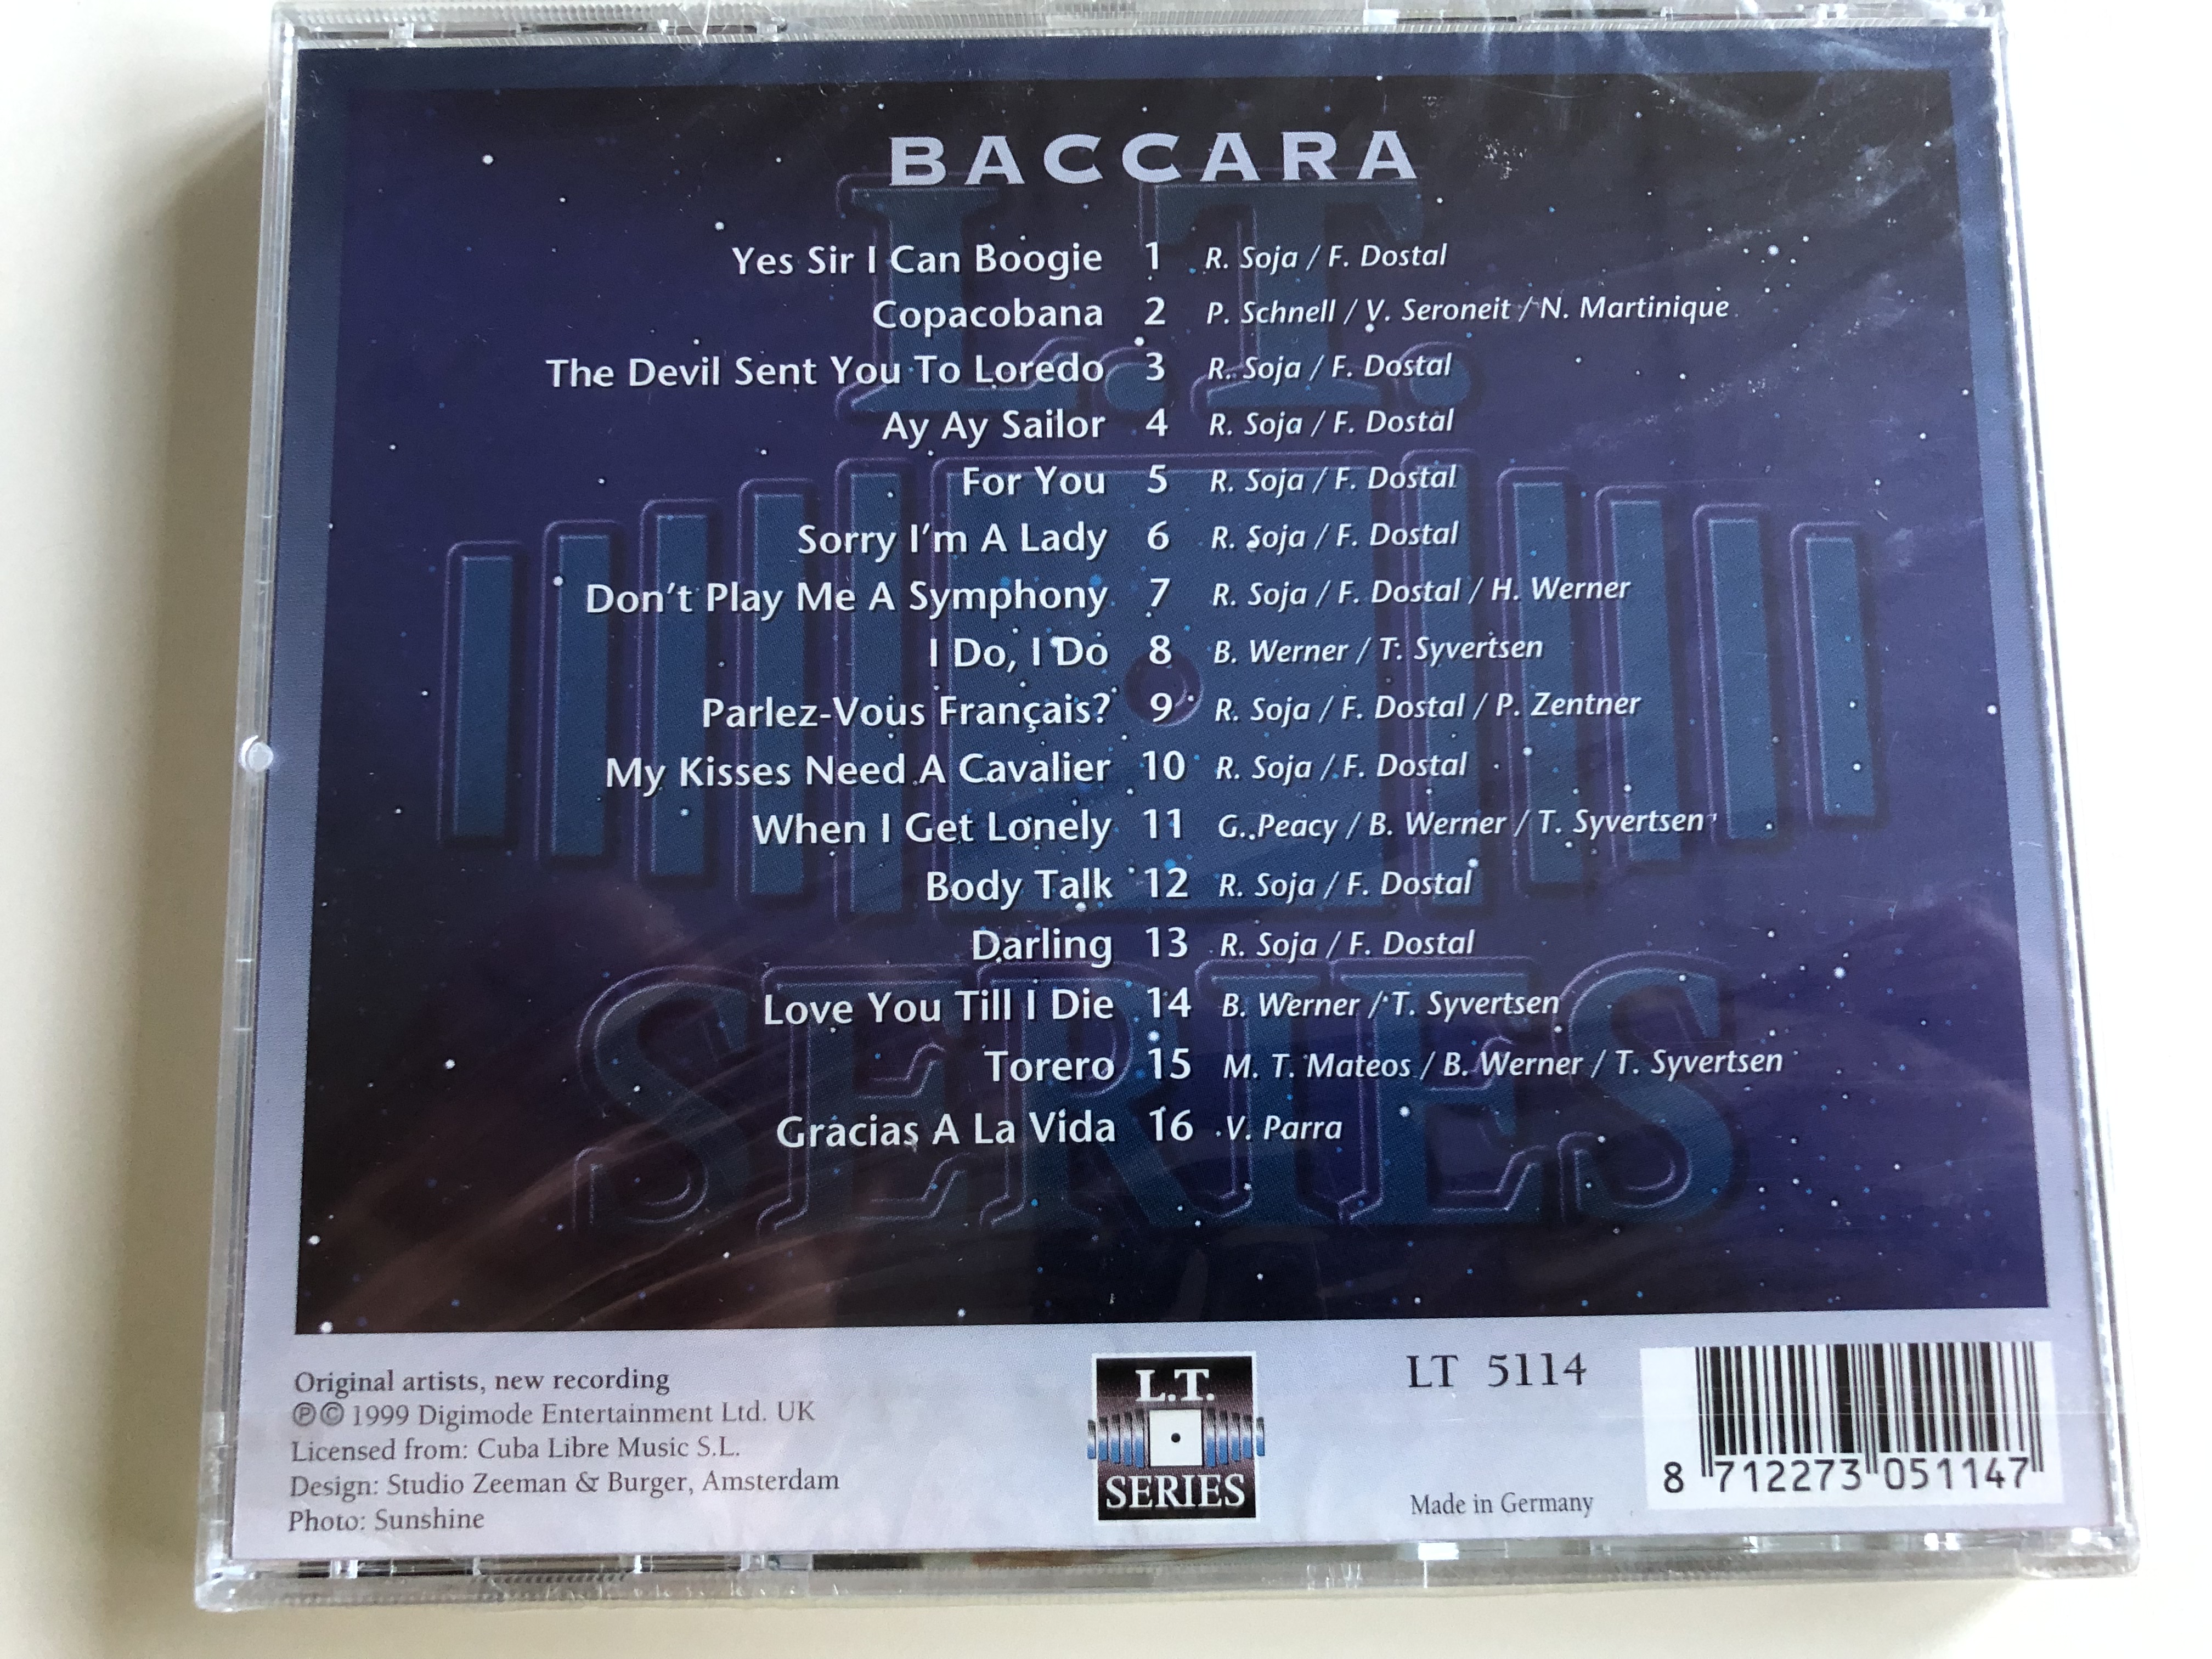 baccara-yes-sir-i-can-boogie-audio-cd-1999-l.t.-series-lt-5114-2-.jpg